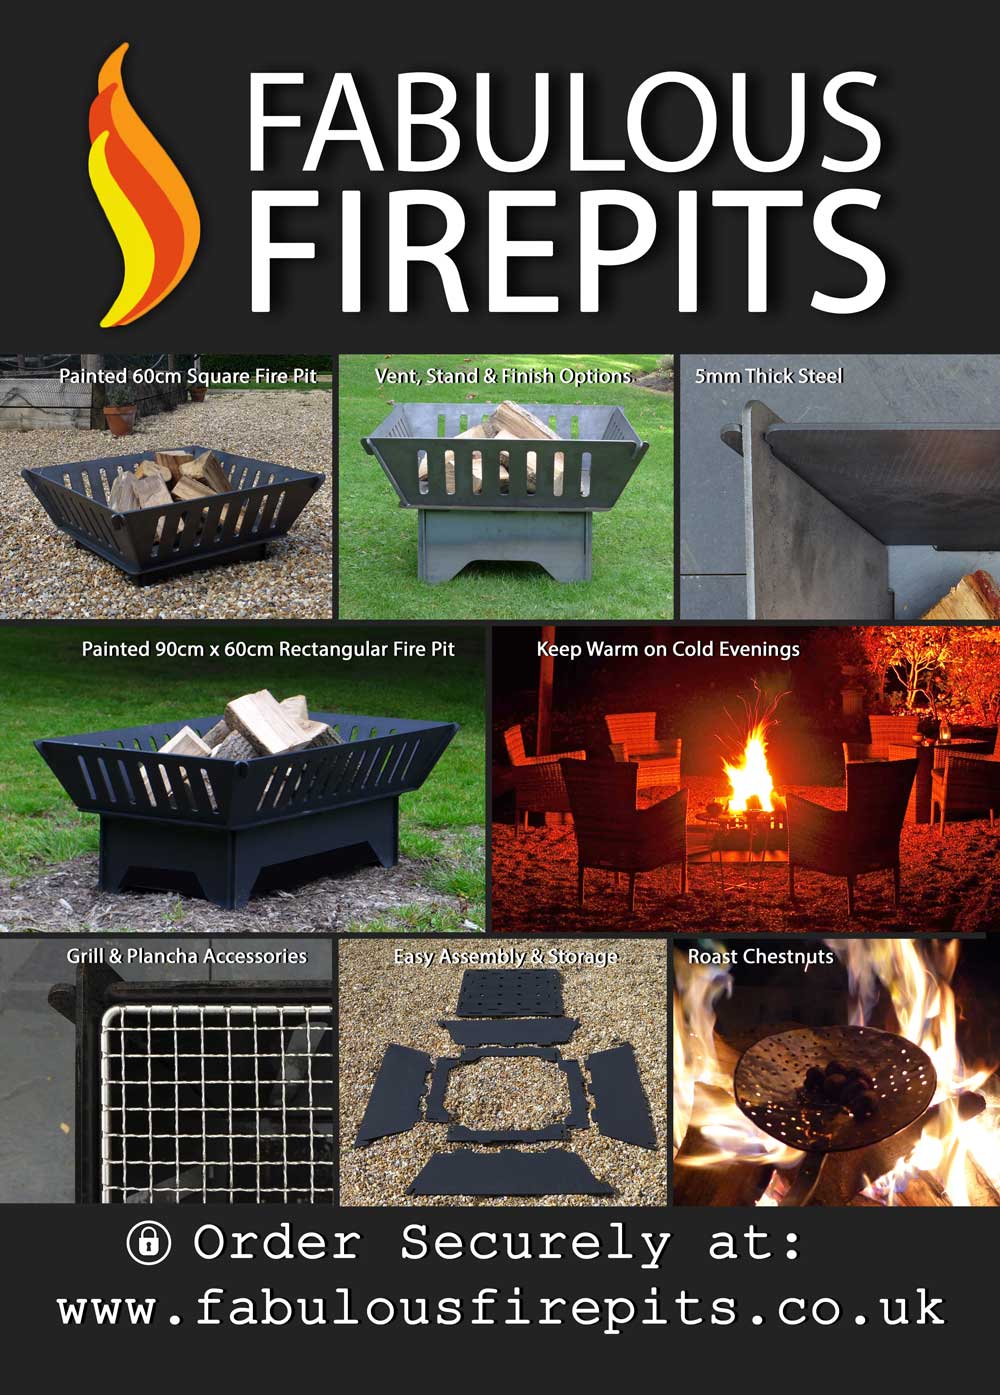 How To Choose A Fire Pit Fabulous, Fireproof Paint For Fire Pit